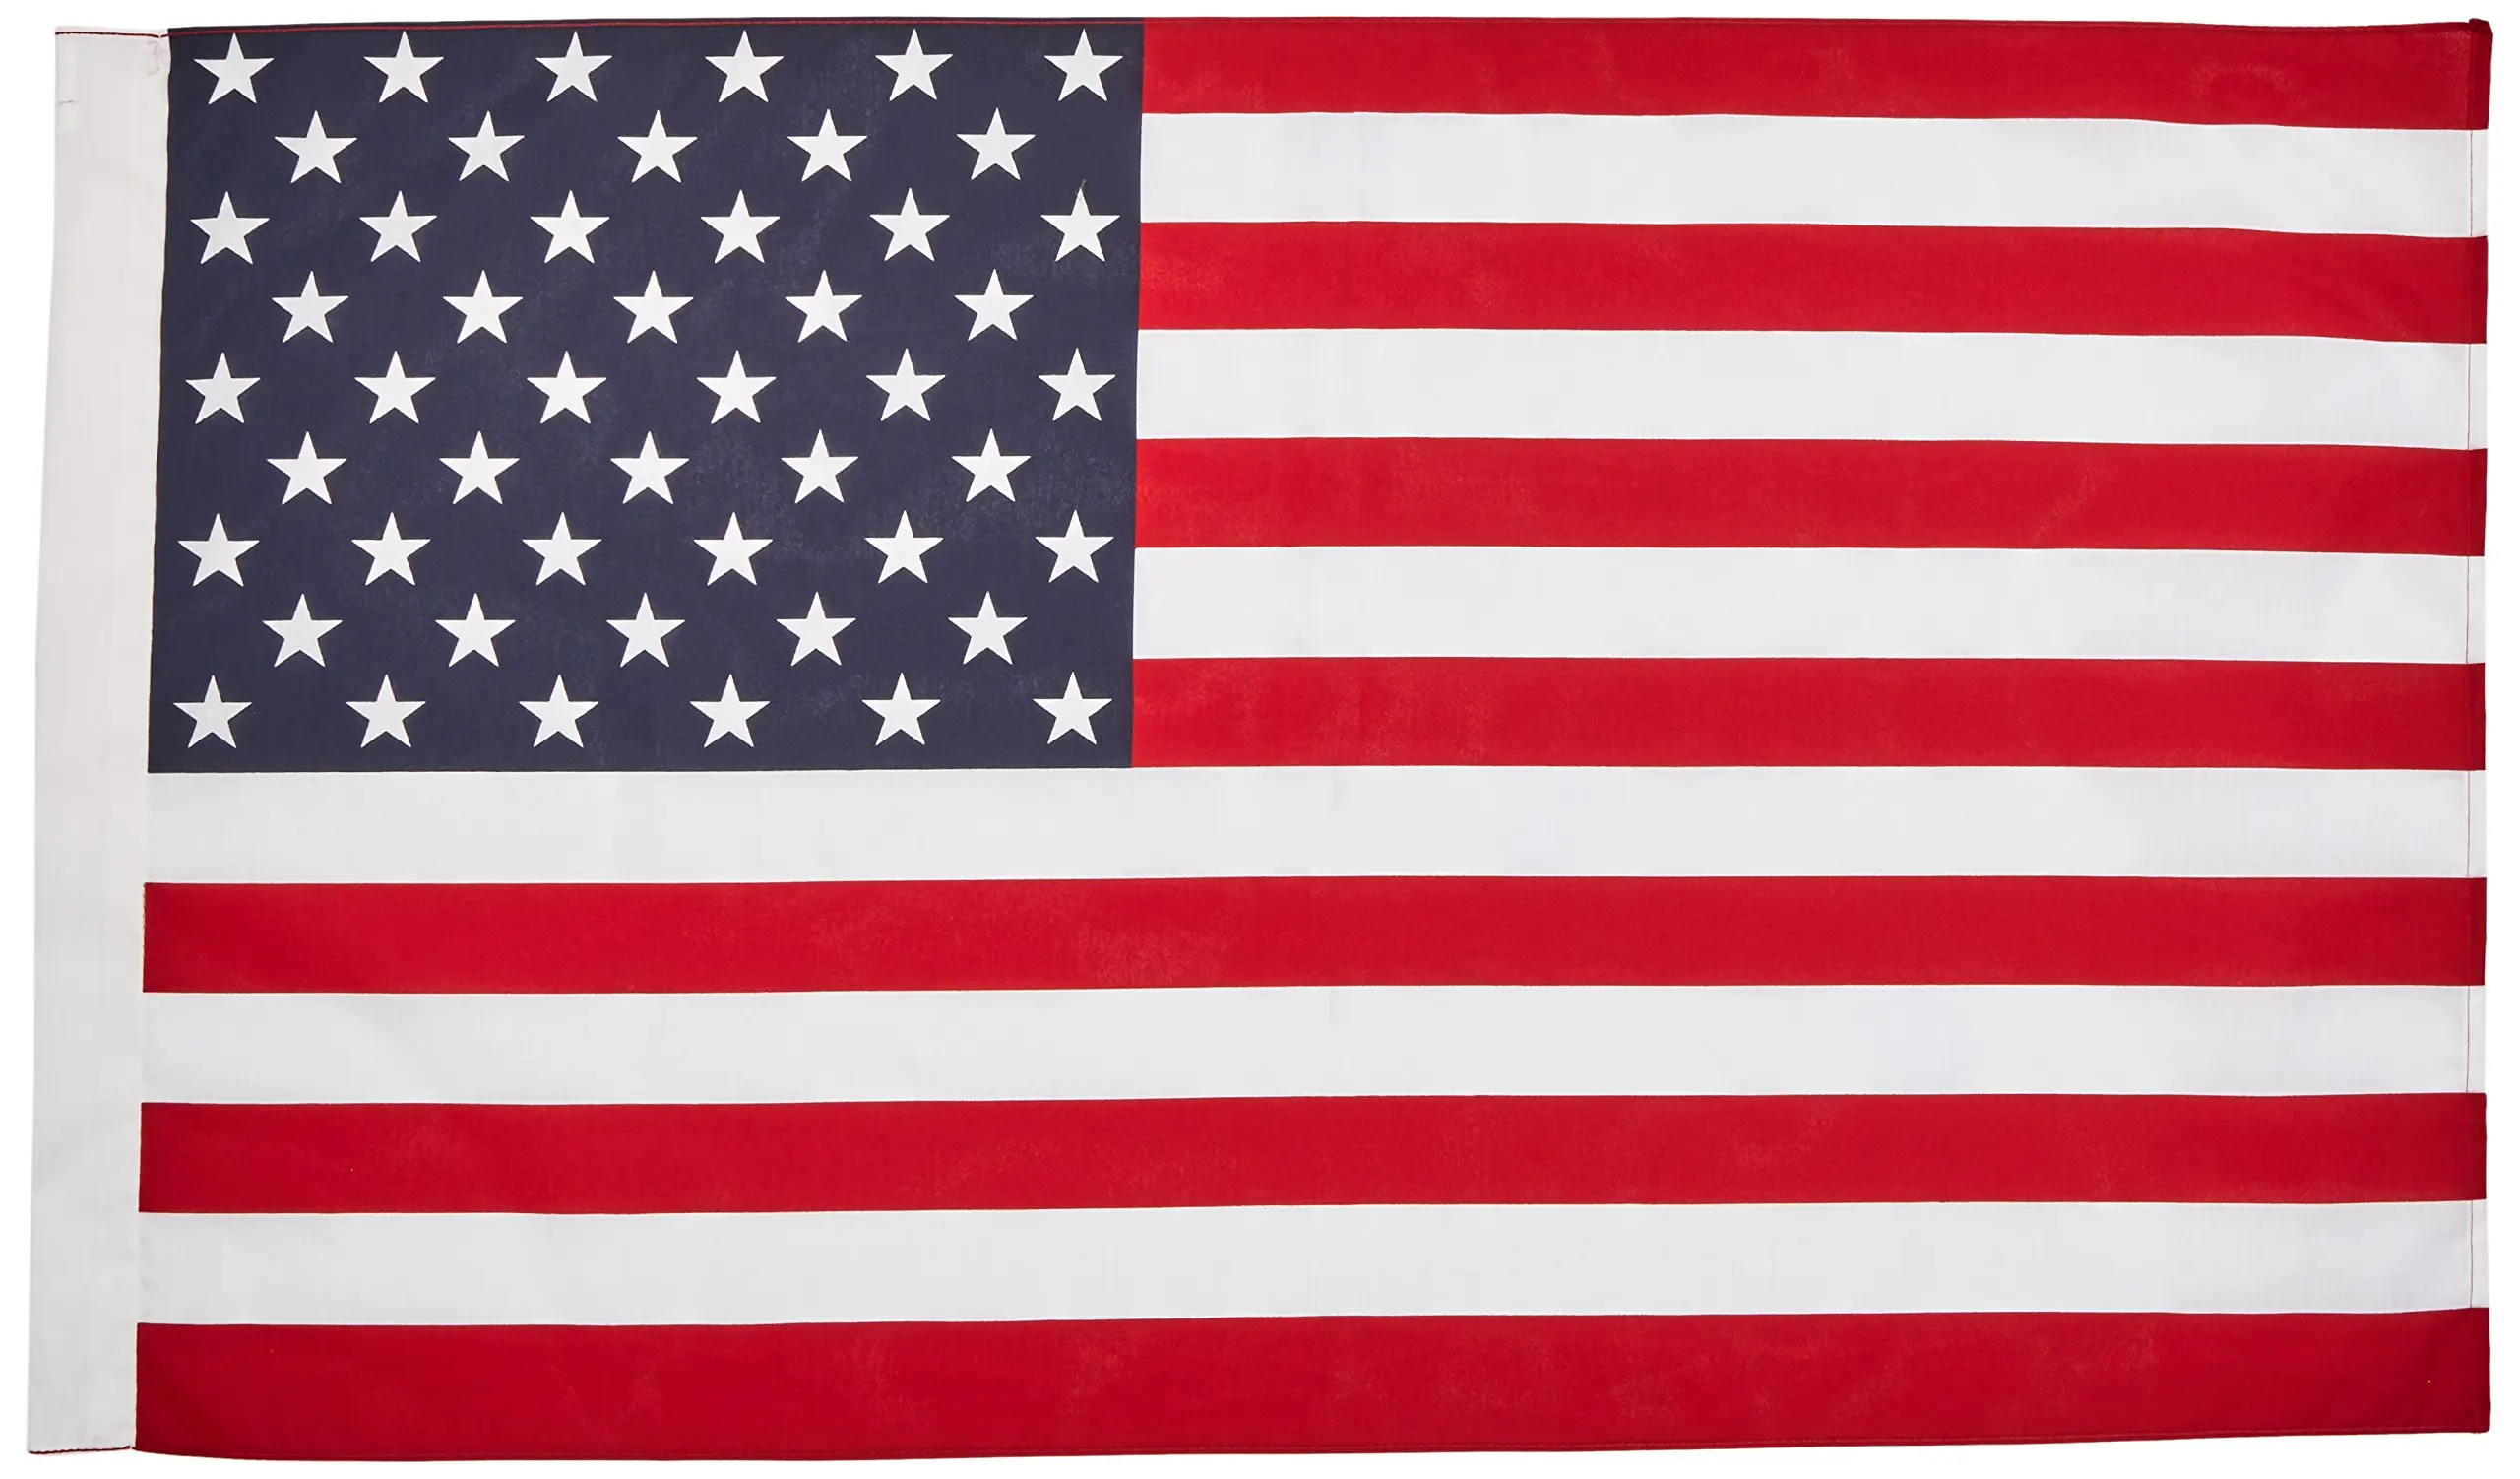 Heath Outdoor Products American Flag - 2.5 x 4 Feet Poly Cotton Flag with P...